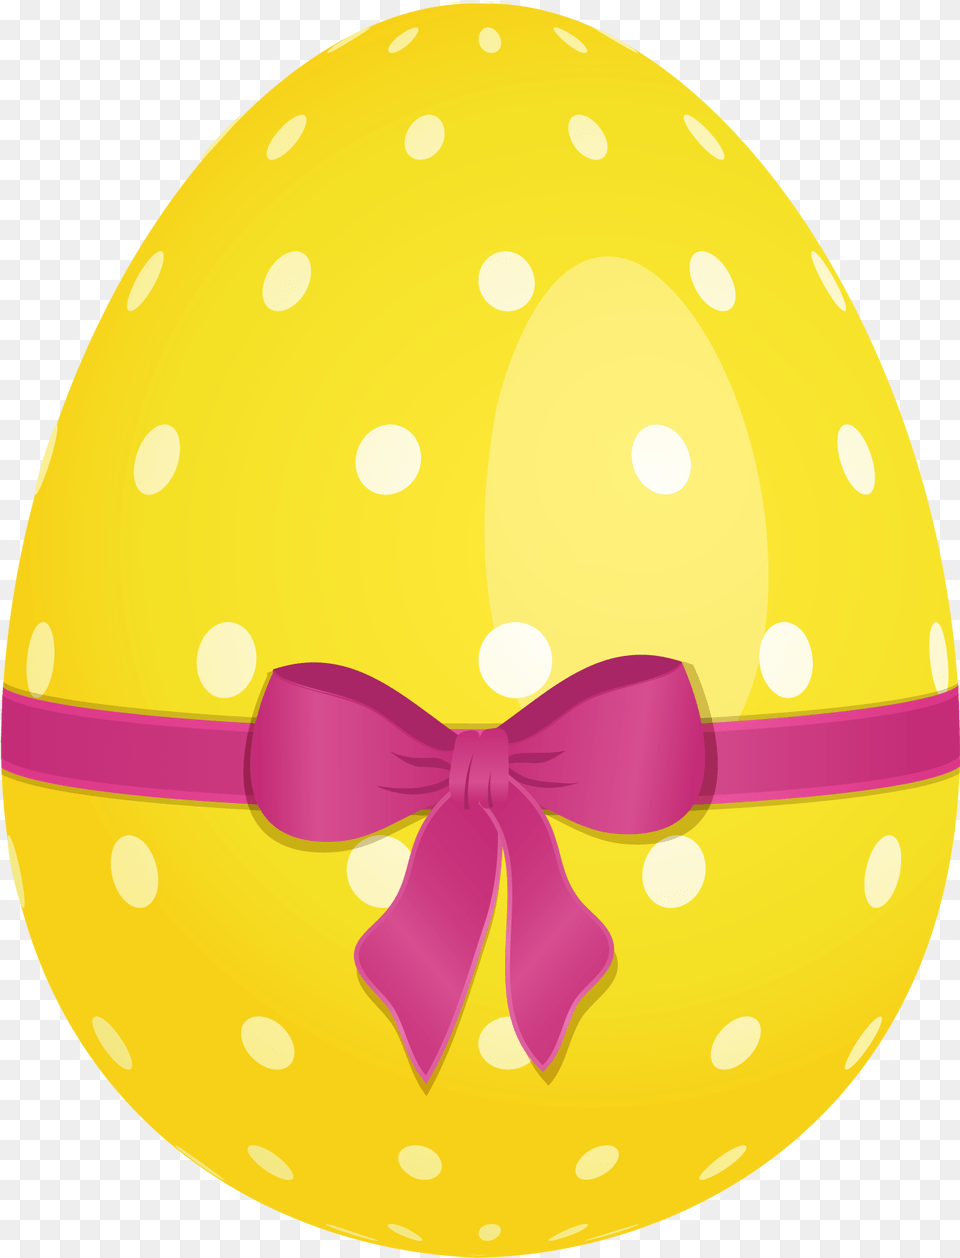 Yellow Dotted Easter Egg With Pink Bow Clipartu200b Easter Egg Background, Easter Egg, Food, Clothing, Hardhat Free Png Download